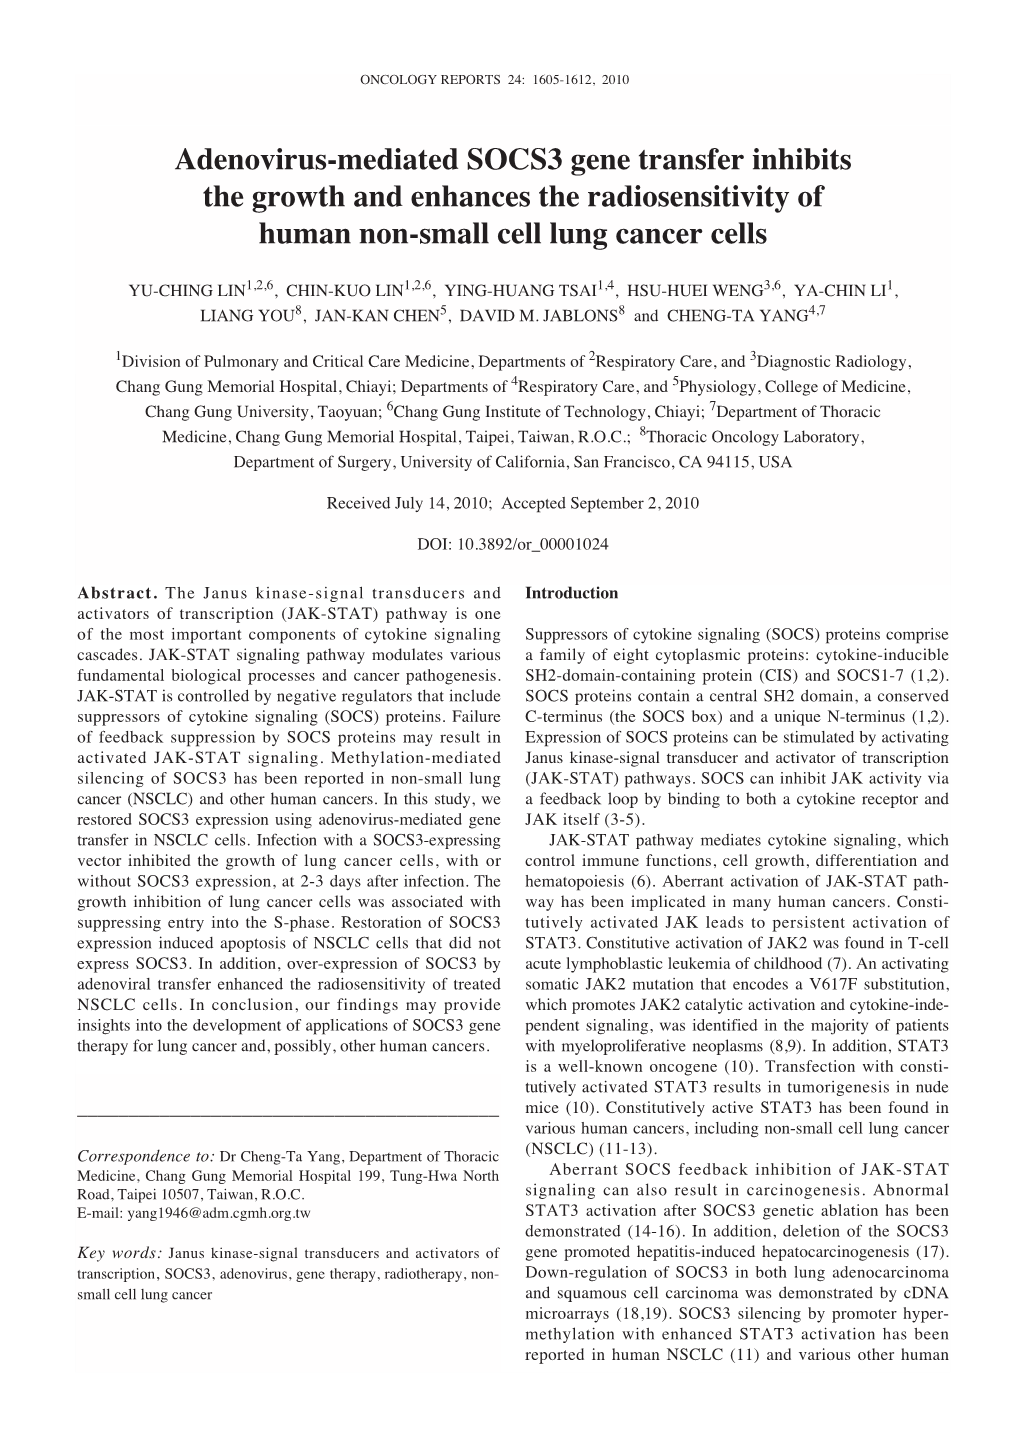 Adenovirus-Mediated SOCS3 Gene Transfer Inhibits the Growth and Enhances the Radiosensitivity of Human Non-Small Cell Lung Cancer Cells